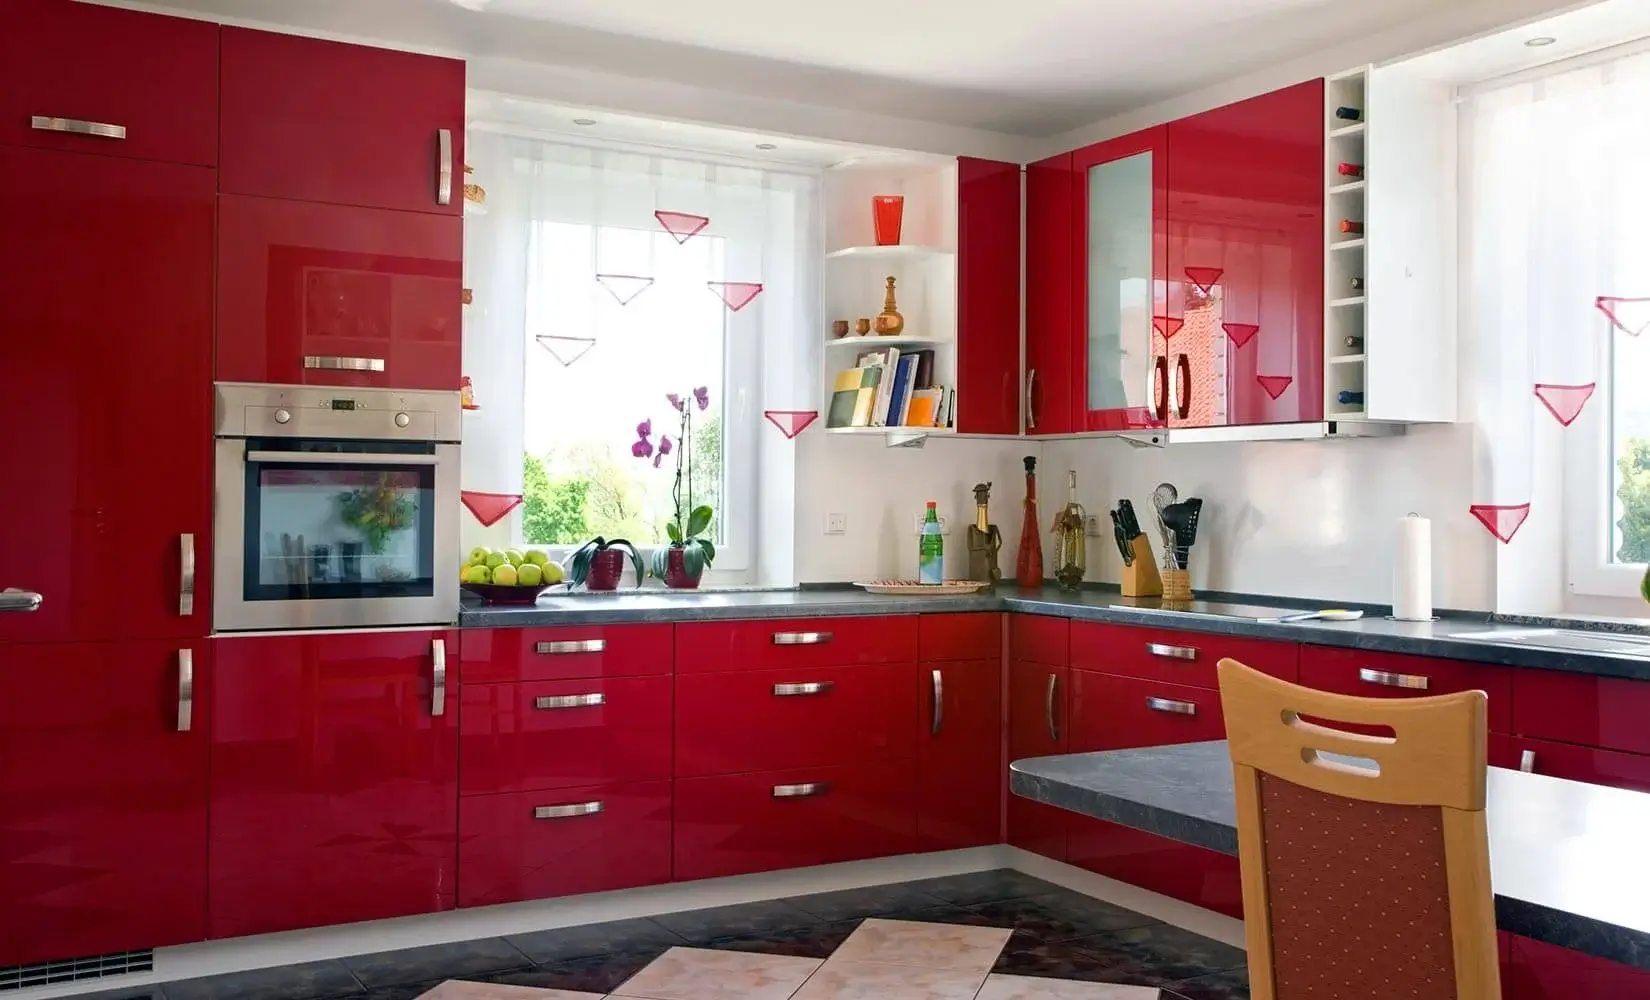 Kitchen with bright red lacquer cabinets.